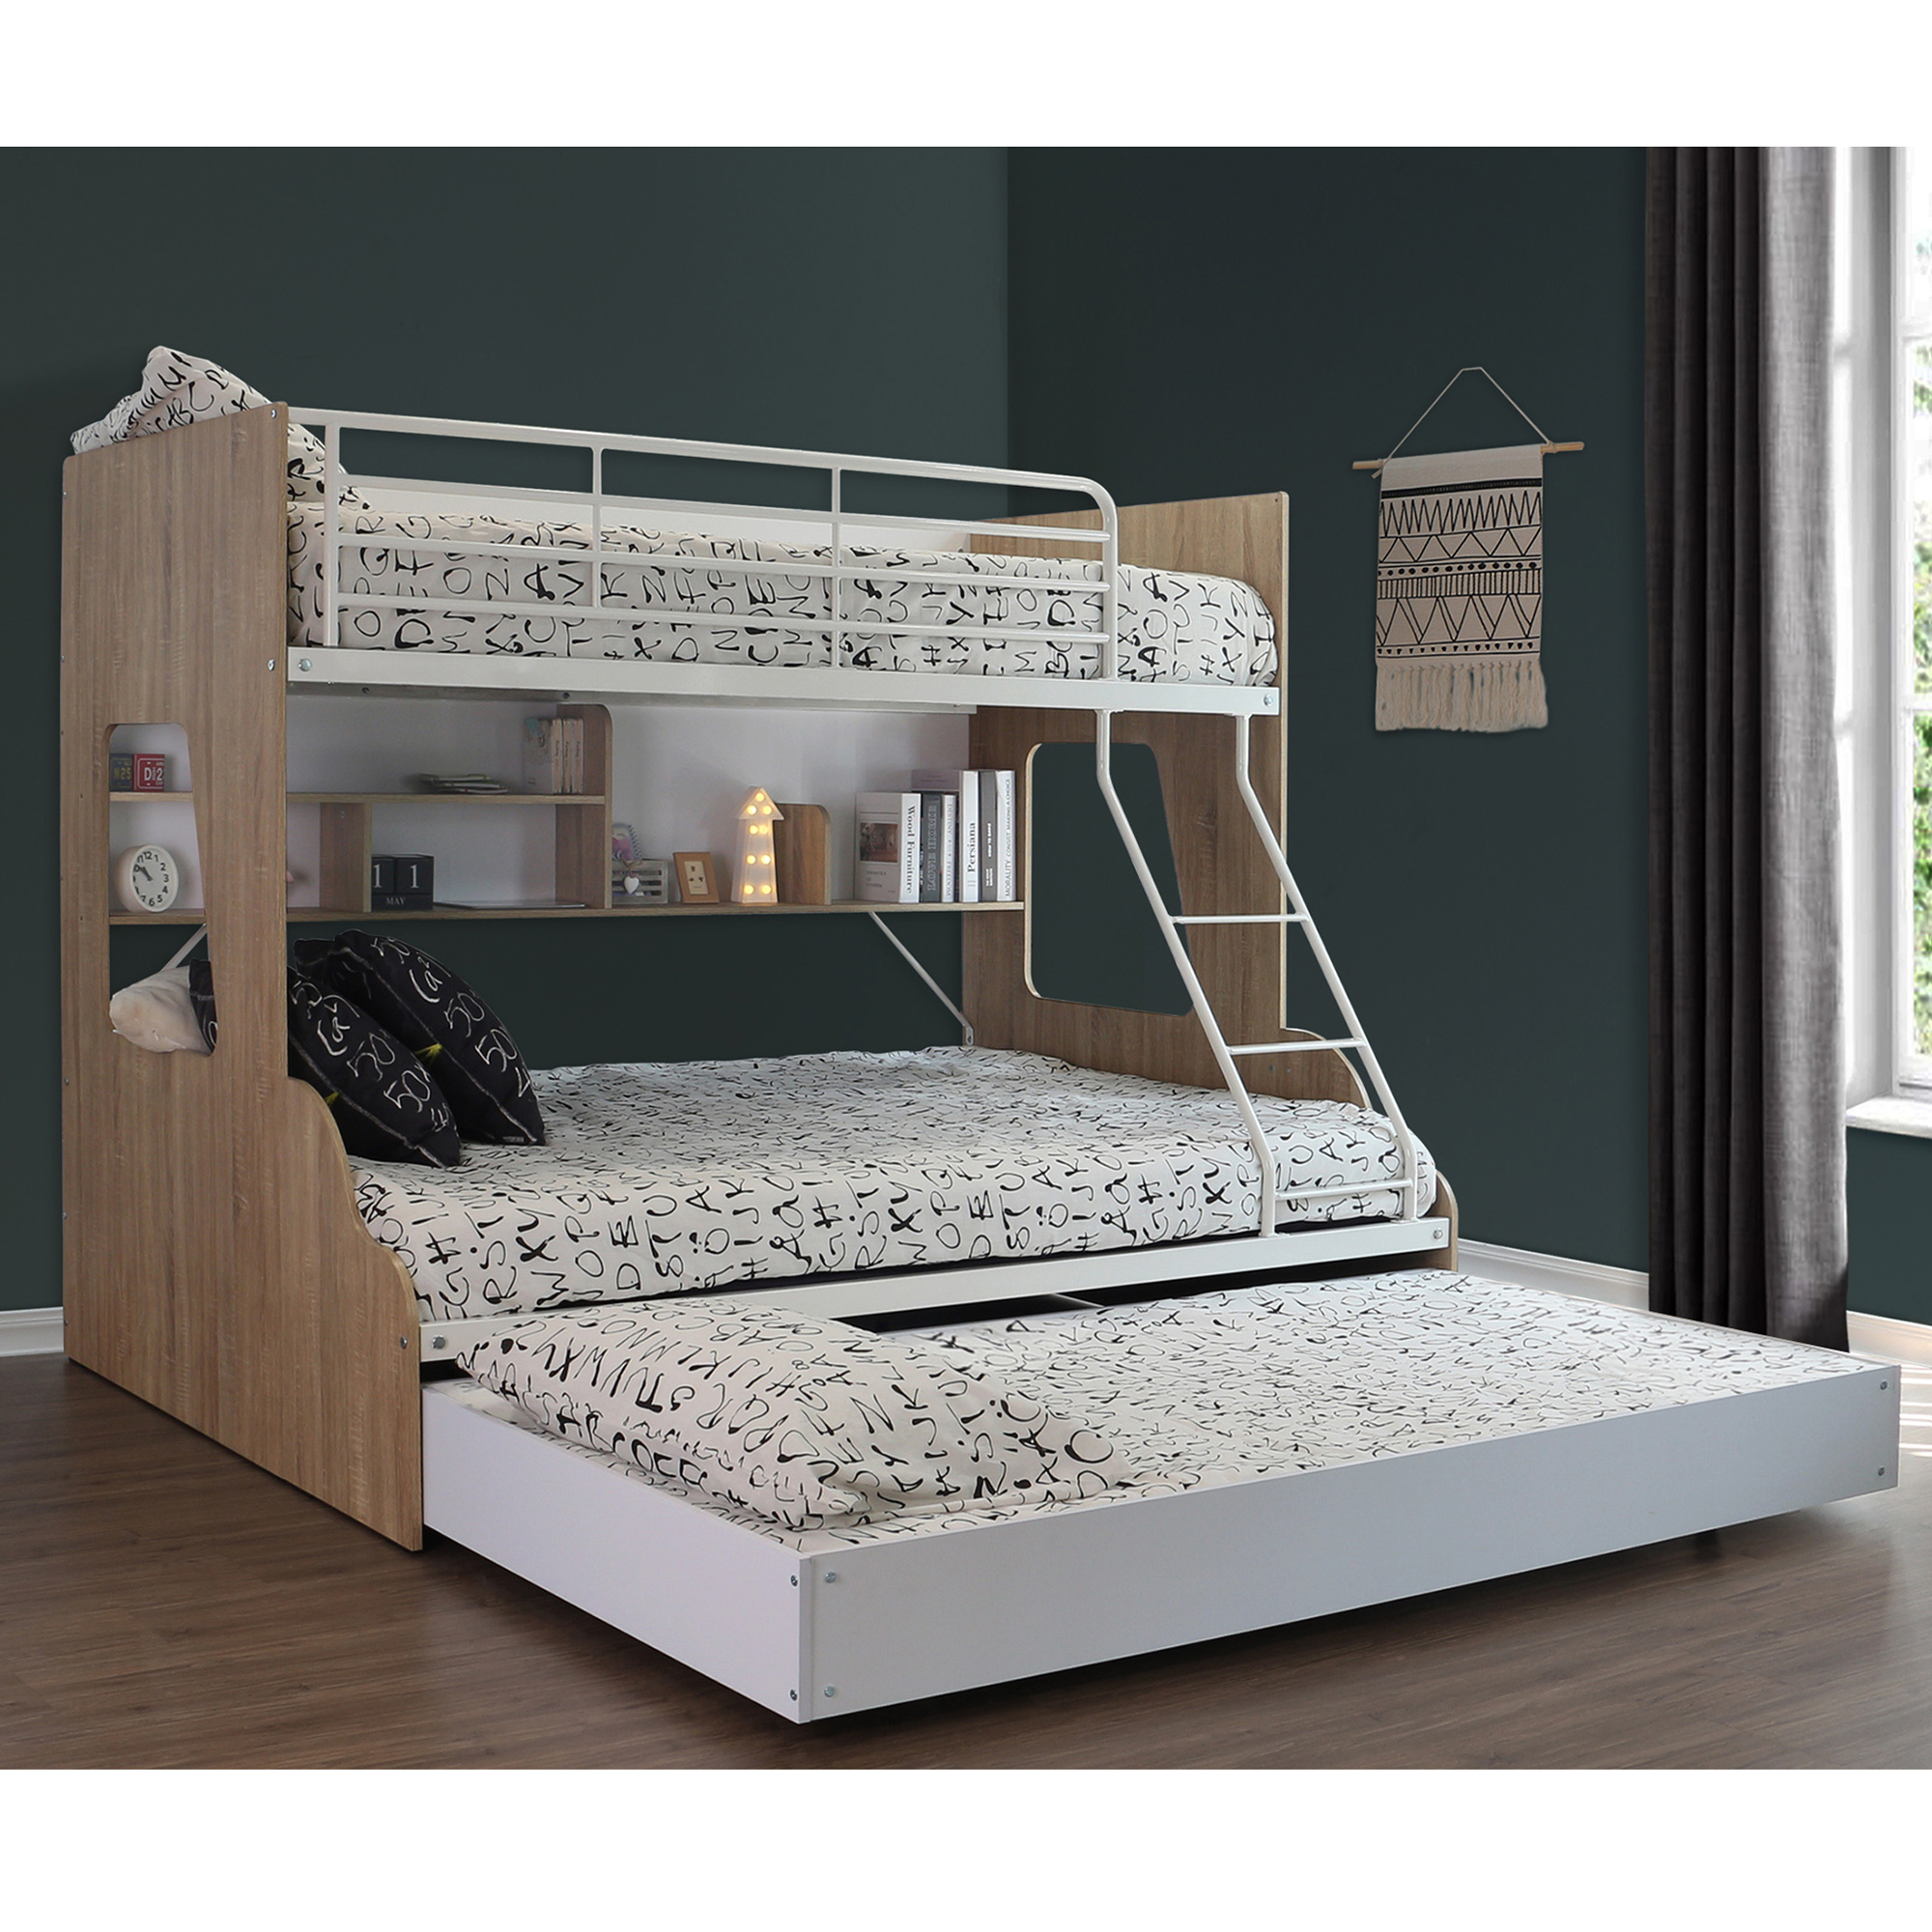 Single Over Double Trio Bunk Bed, Small Single Bunk Bed Mattress